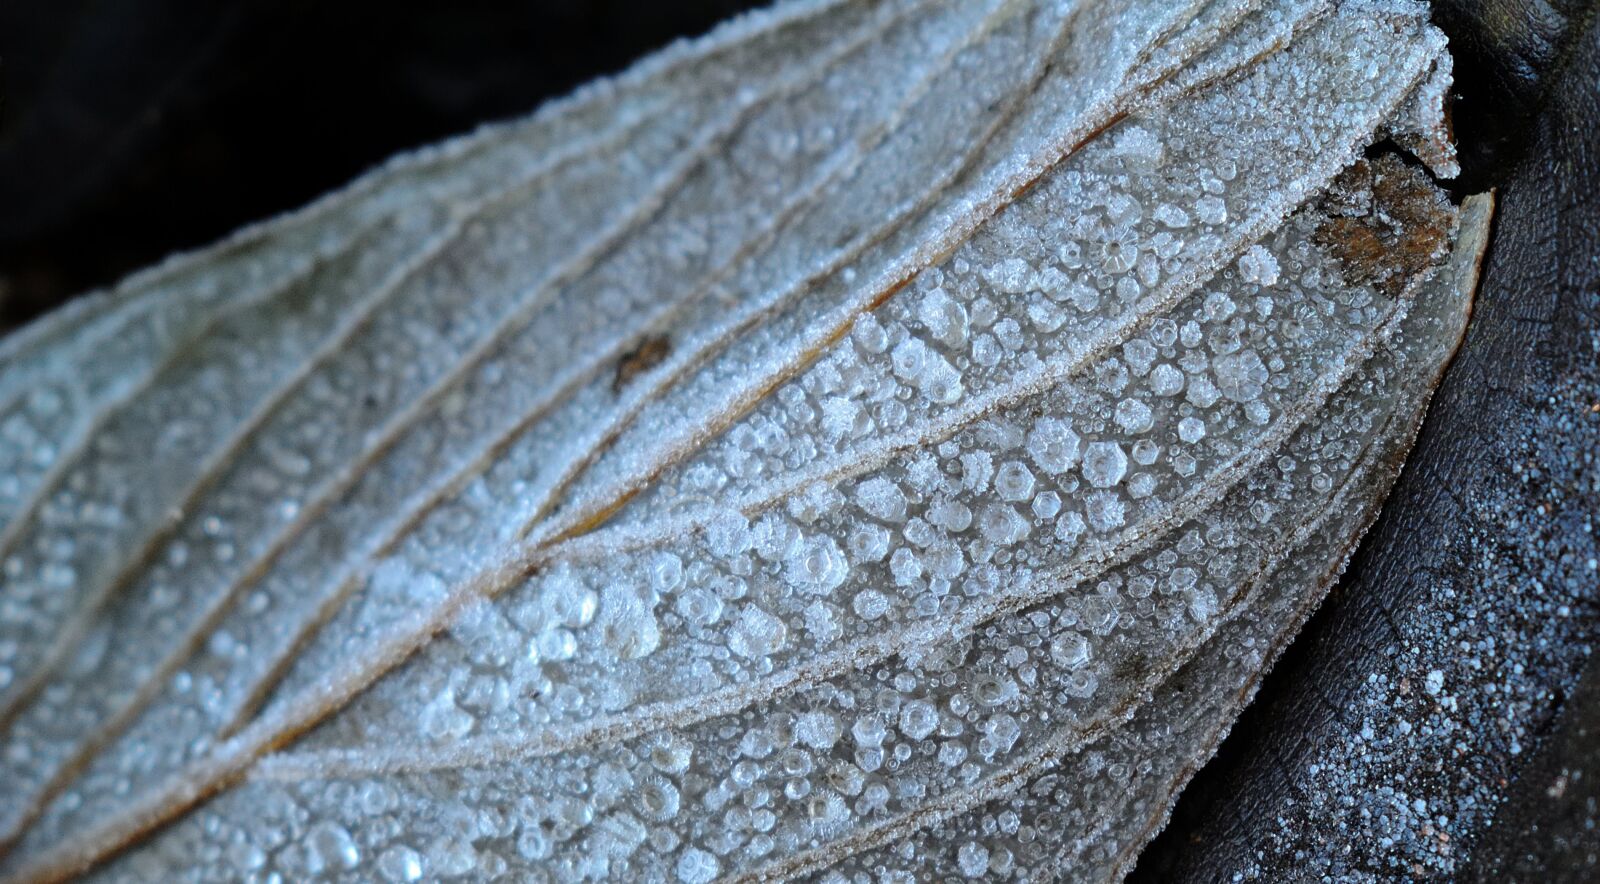 VR 18-55mm f/3.5-5.6G sample photo. Frost, ice, winter photography